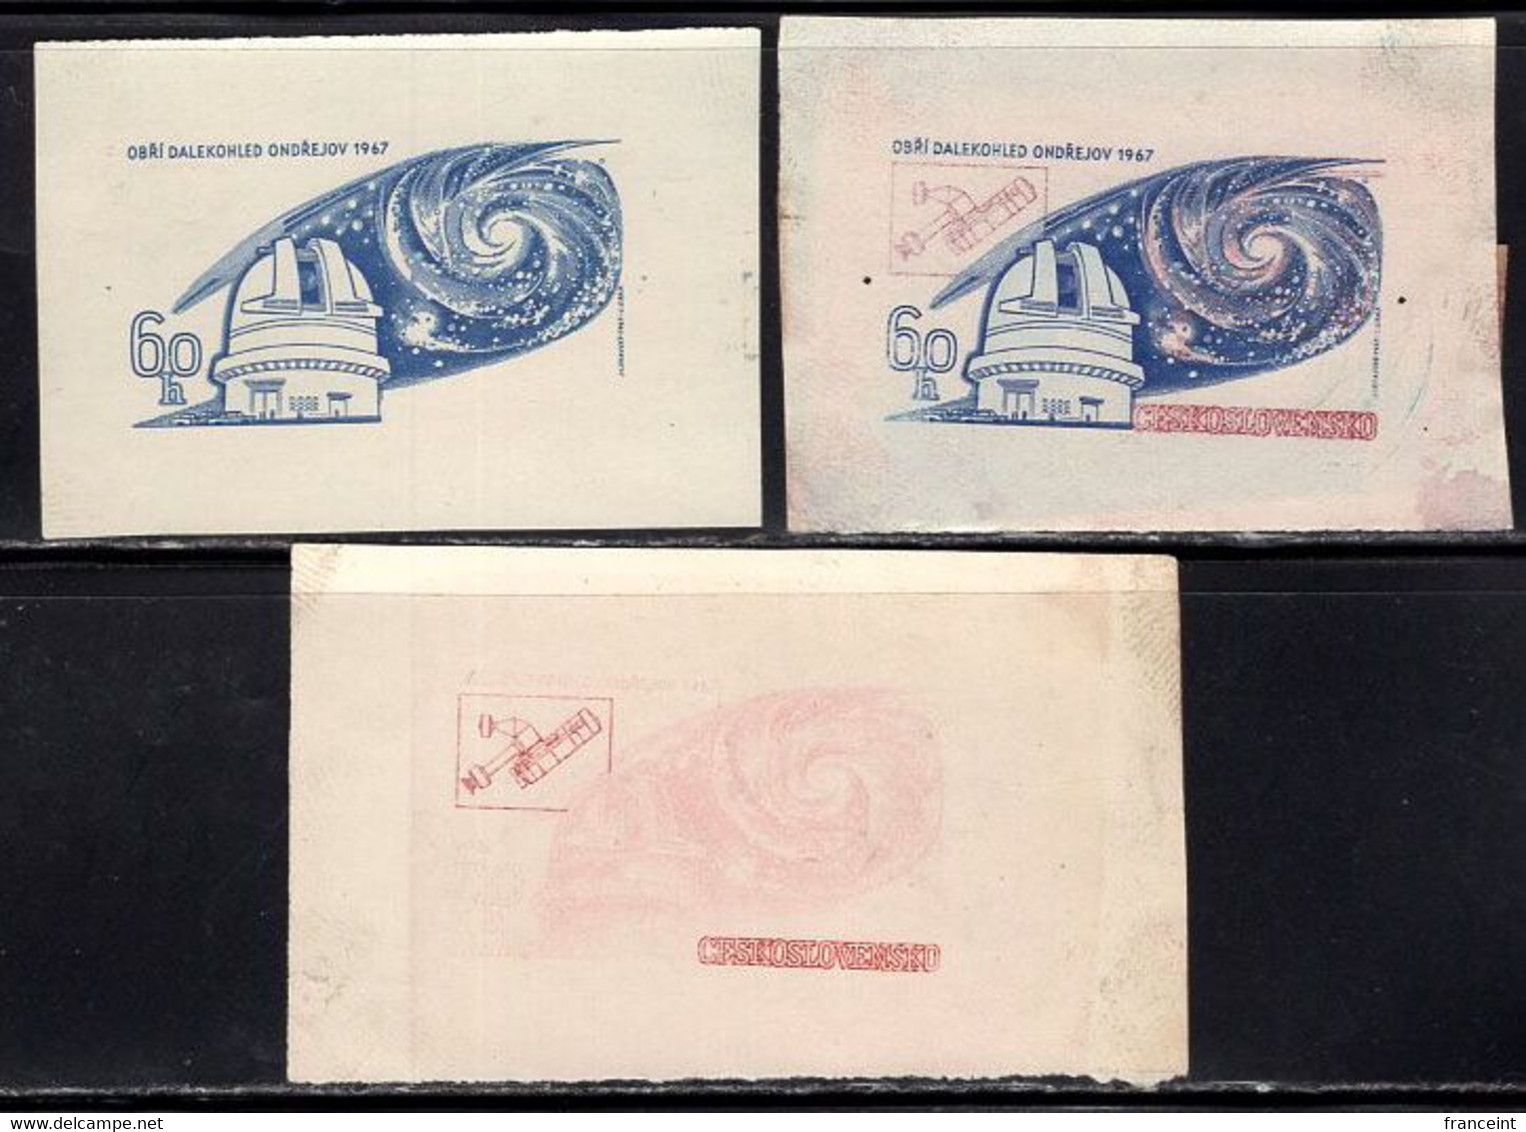 CZECHOSLOVAKIA (1967) Ondrejov Observatory. Galaxy. Series Of 3 Die Proofs Showing Various Stages. Scott No 1489. - Ensayos & Reimpresiones